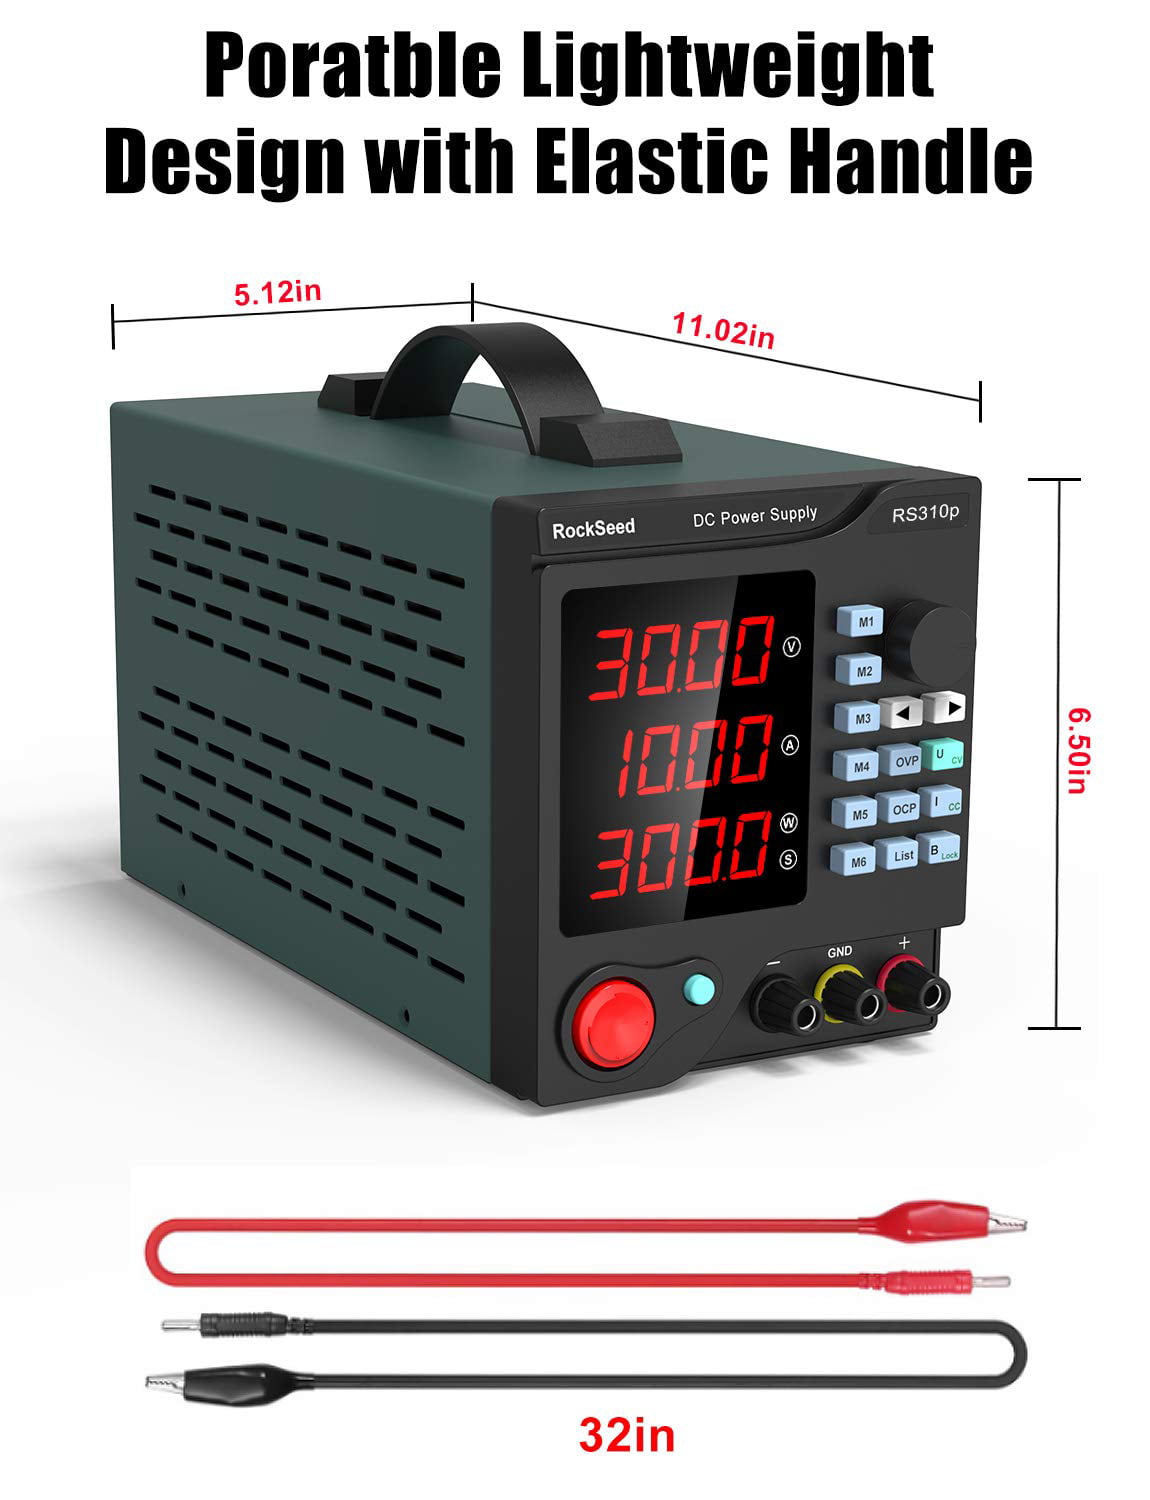 Adjustable Switching Regulated Power Supply with 4-Digit Large Display Alligator Leads UK Plug） Programmable 30V/10A DC Power Supply Variable PC Software 5V/2A USB Interface